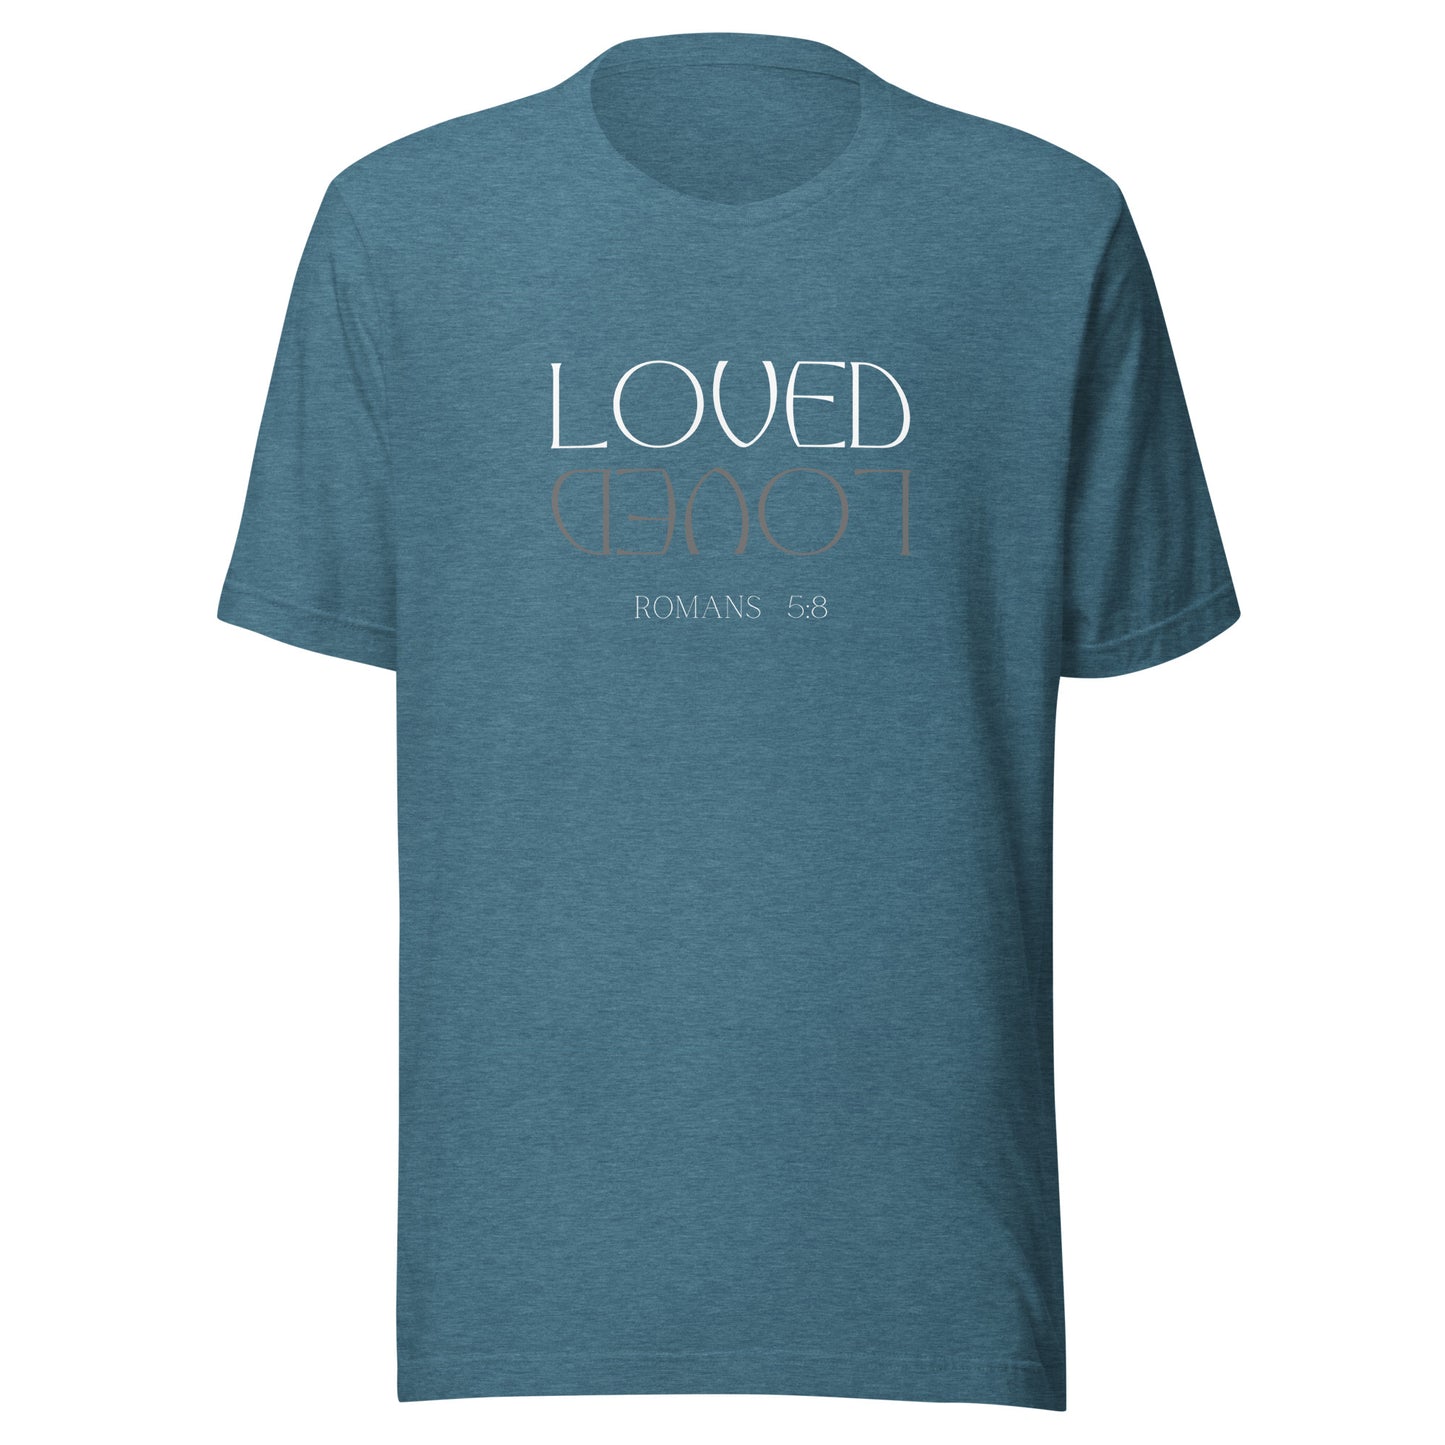 Reflection LOVED T-Shirt